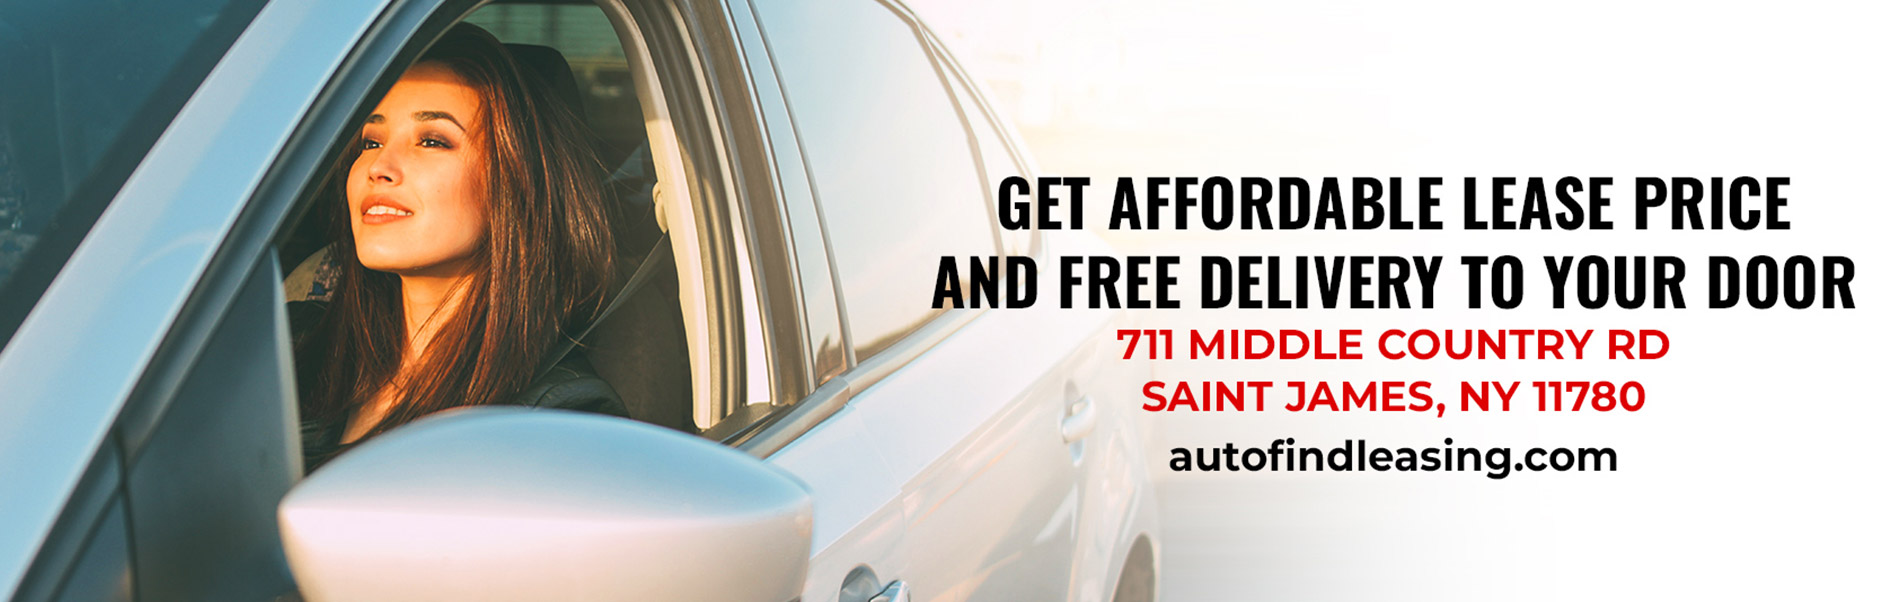 Get affordable lease price and free delivery to your door